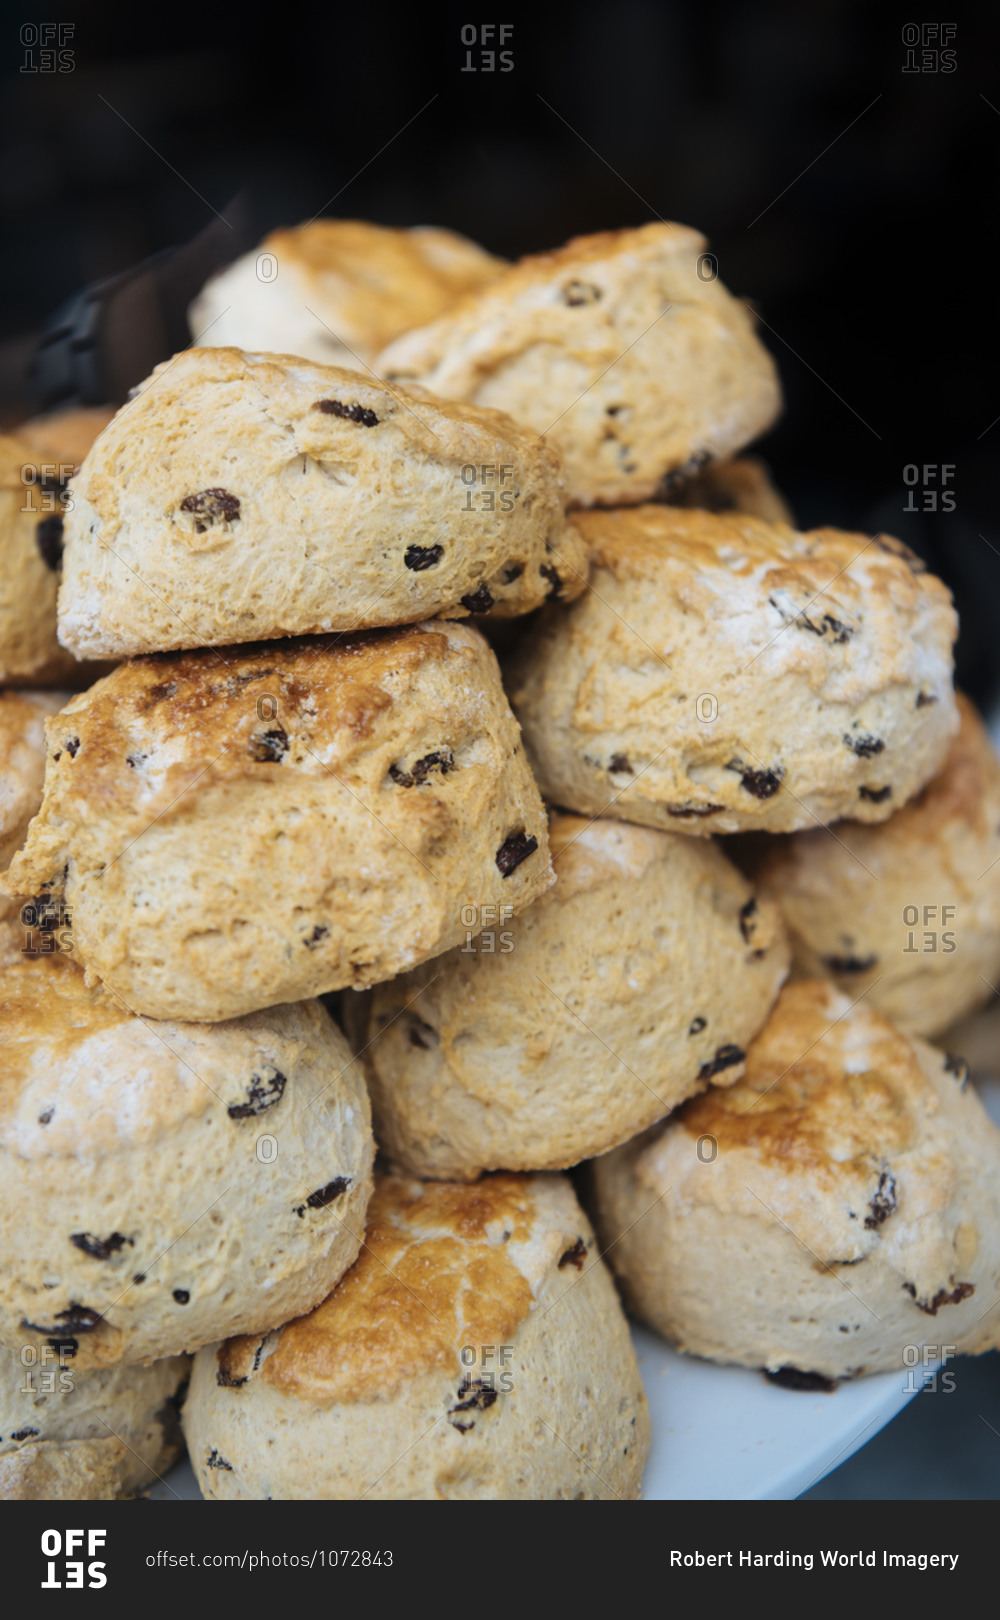 Scones on display, Bourton-on-the-Water, Cotswolds, Gloucestershire, England, United Kingdom, Europe